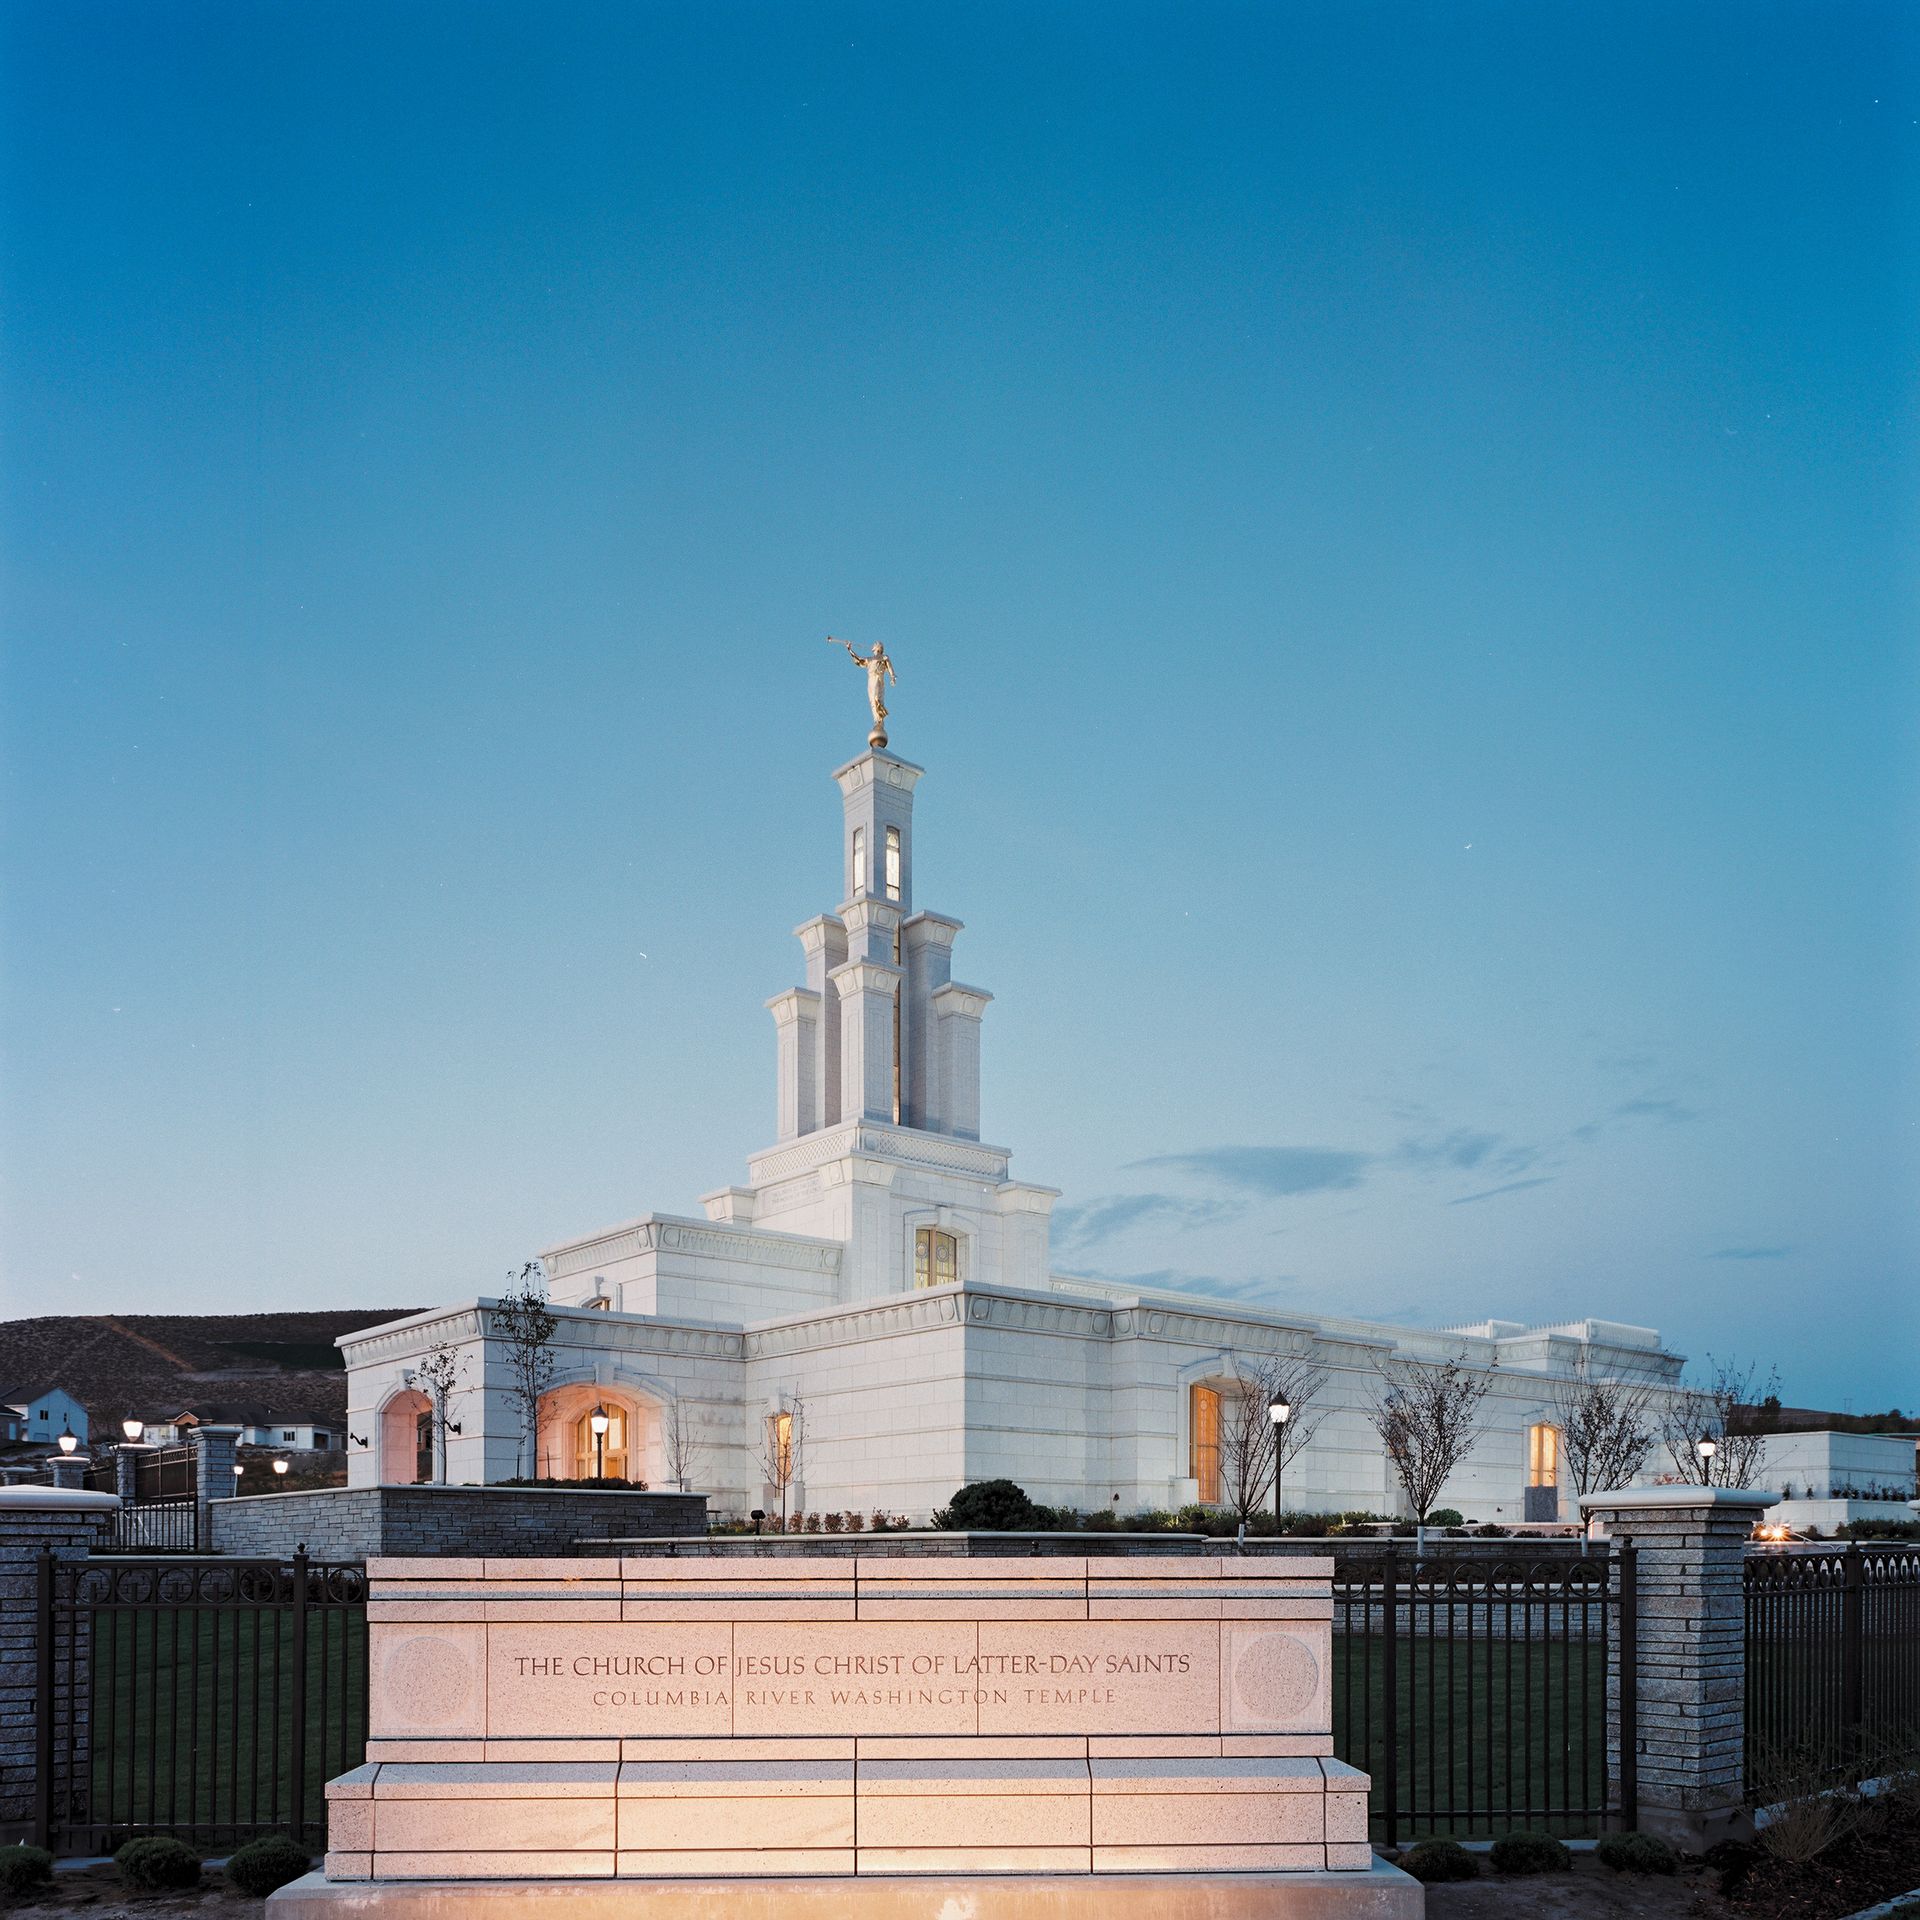 An evening view of the temple name sign in front of the Columbia River Washington Temple.